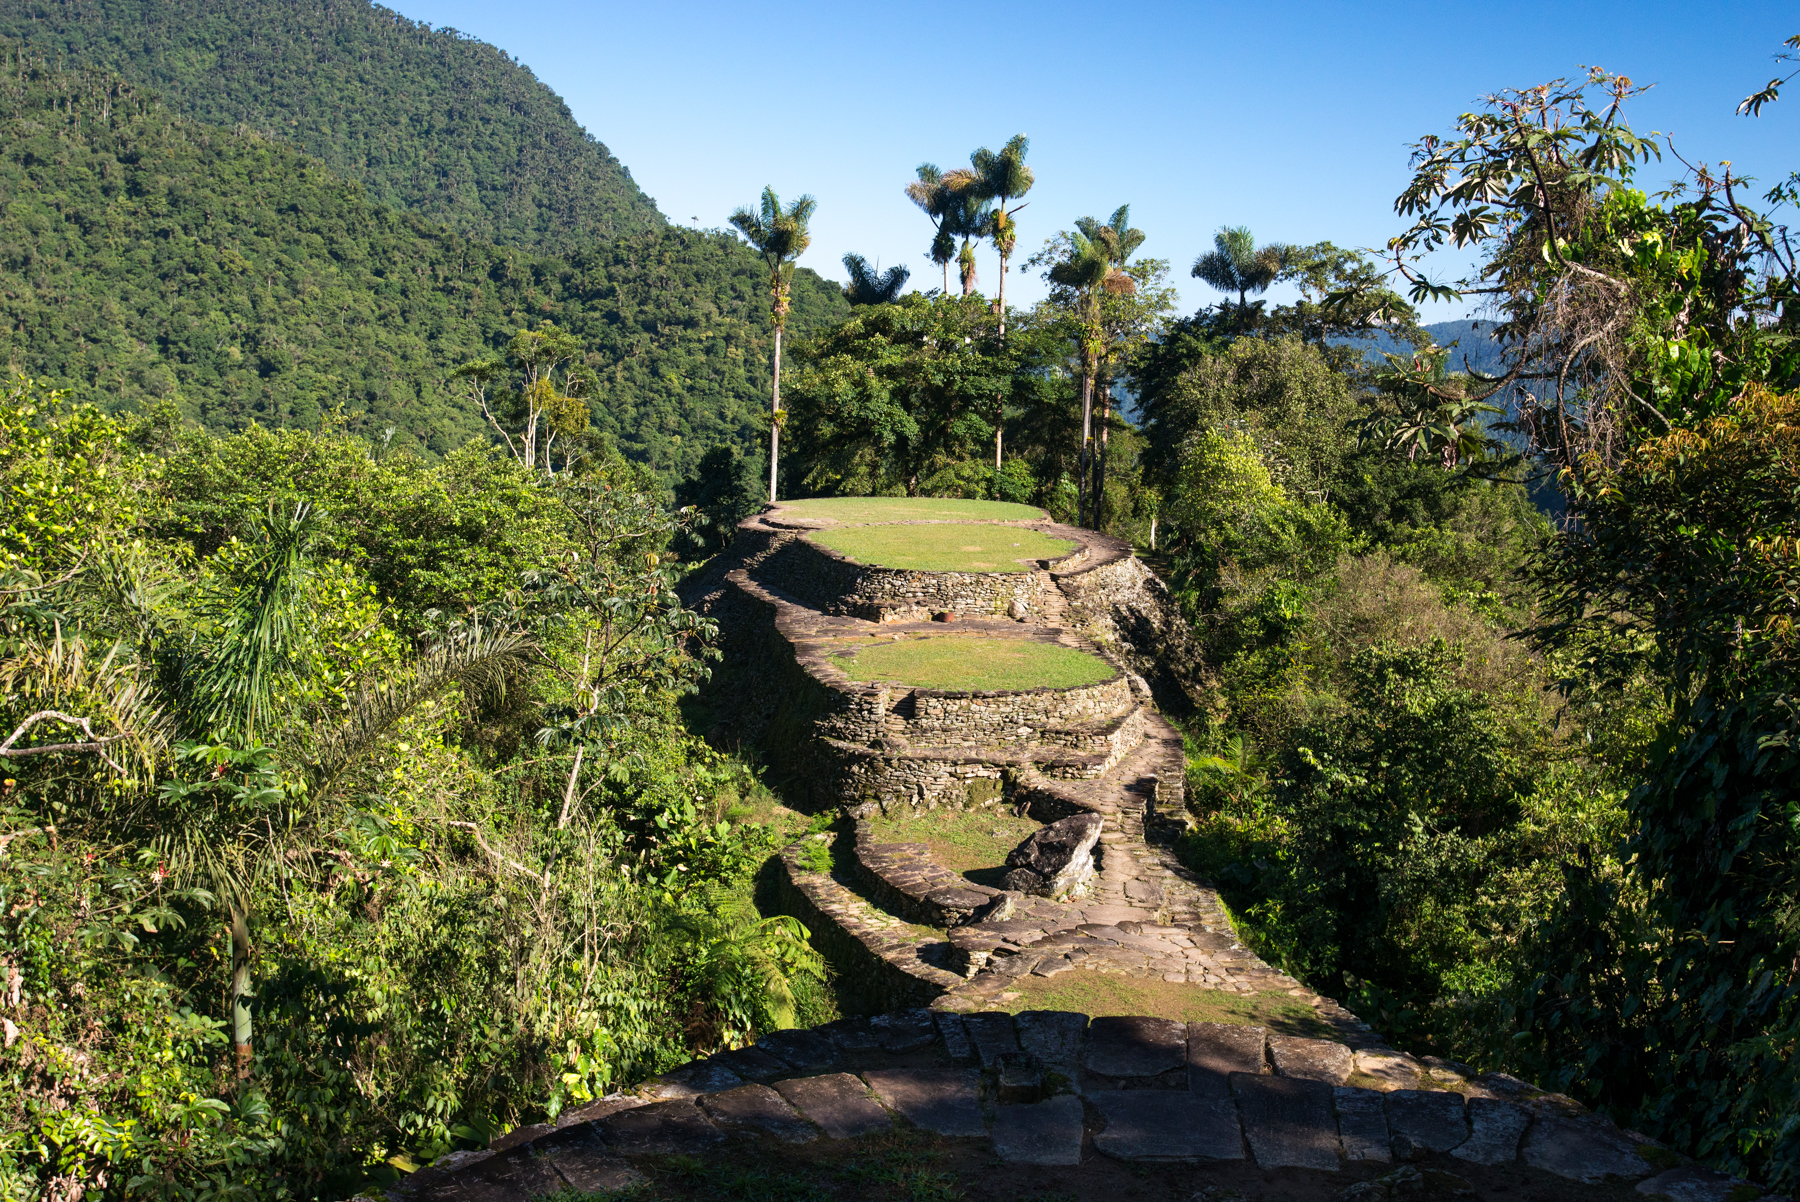 A jungle trek to Colombia’s Lost City